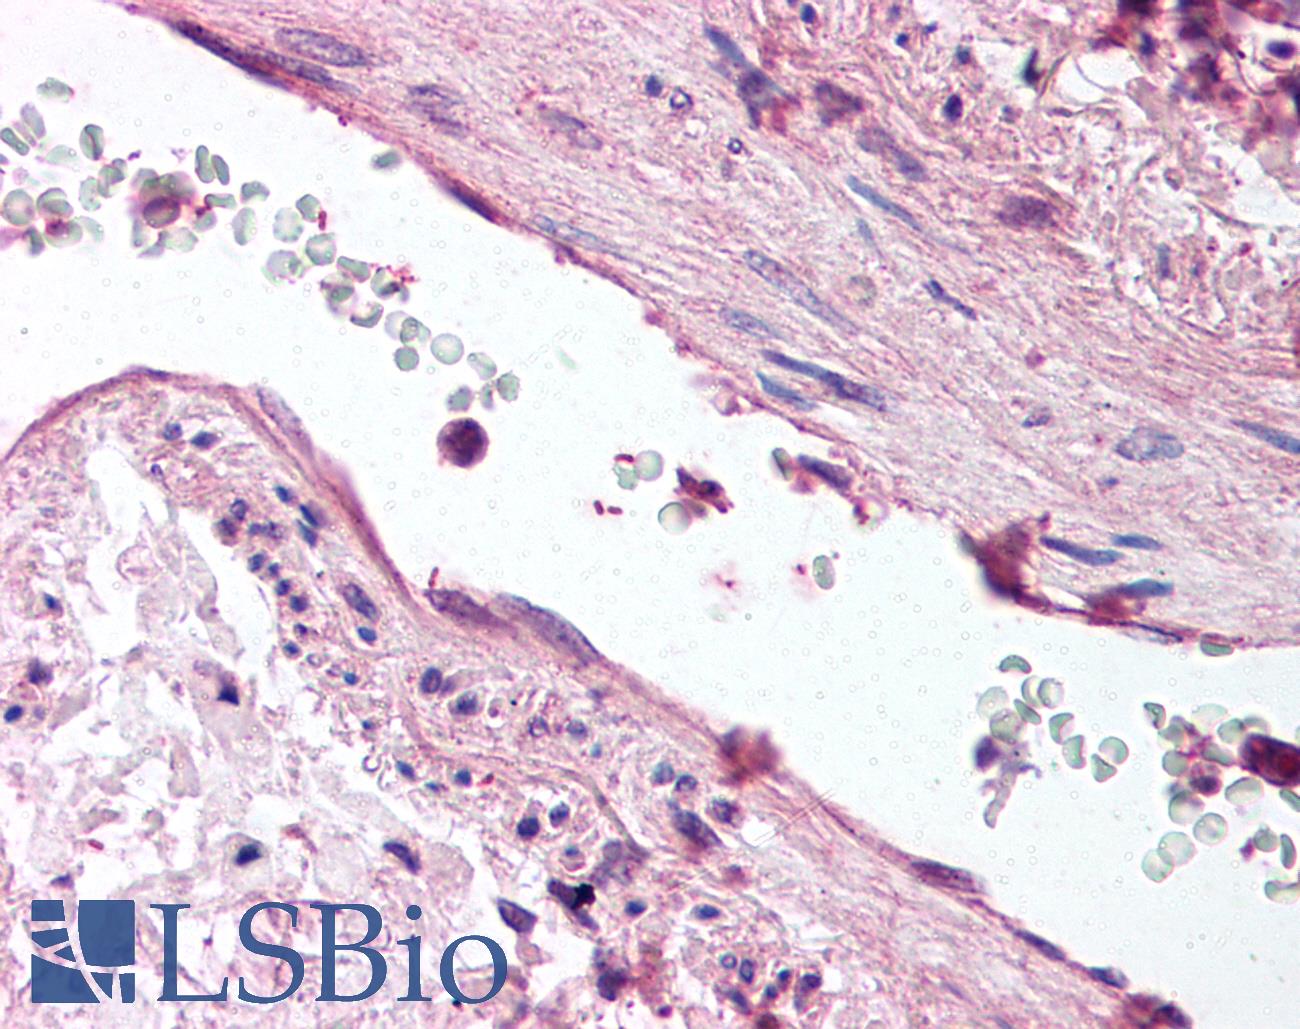 ANGPT1 / Angiopoietin-1 Antibody - Anti-ANGPT1 / Angiopoietin-1 antibody IHC staining of human lung, vessel. Immunohistochemistry of formalin-fixed, paraffin-embedded tissue after heat-induced antigen retrieval. Antibody dilution 1:200.